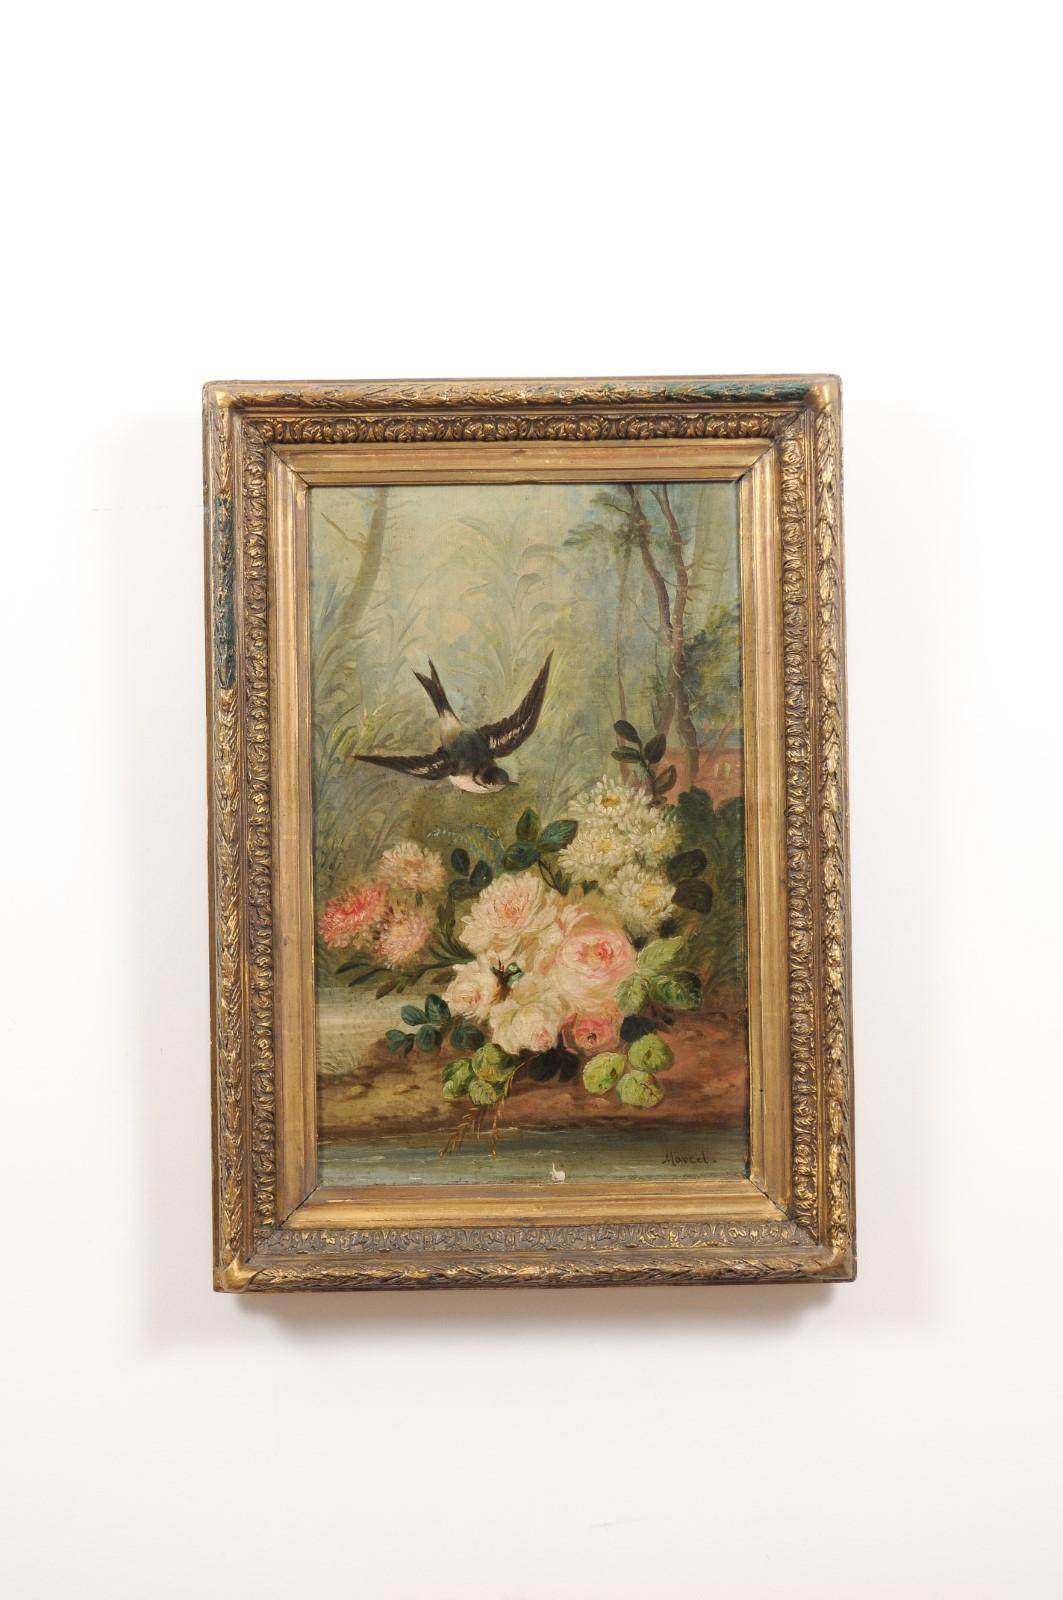 A French Napoléon III period oil on canvas painting from the mid 19th century, with bird and roses in giltwood frame. Created in France at the beginning of emperor Napoléon III's reign, this oil on canvas painting depicts a white and black bird